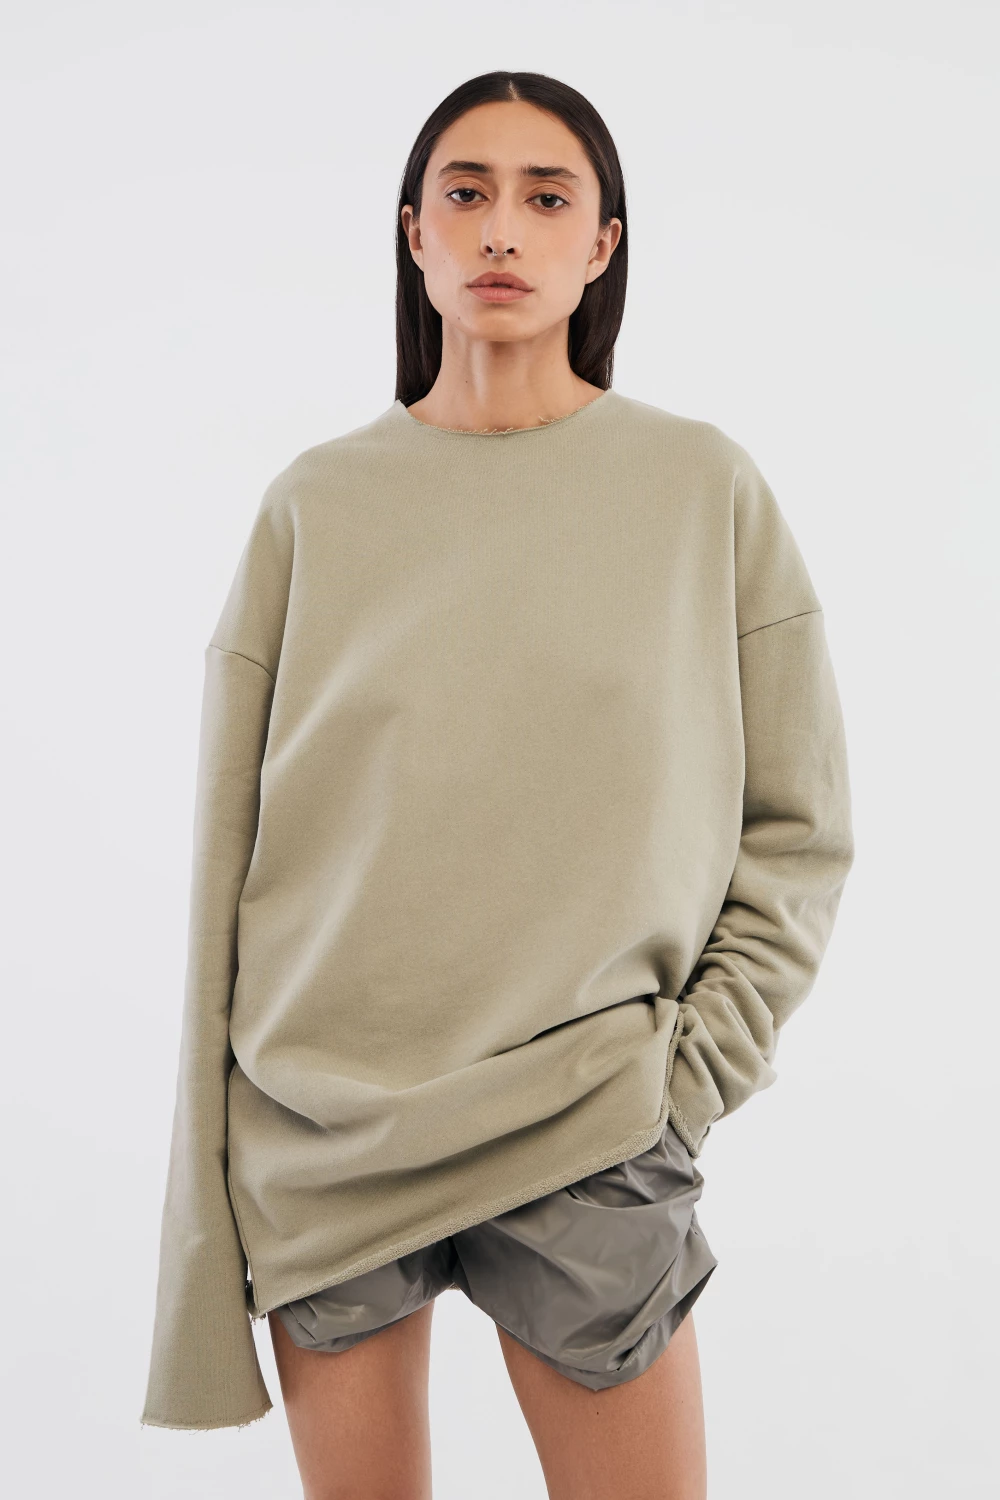 sweatshirt relax fit in forest color